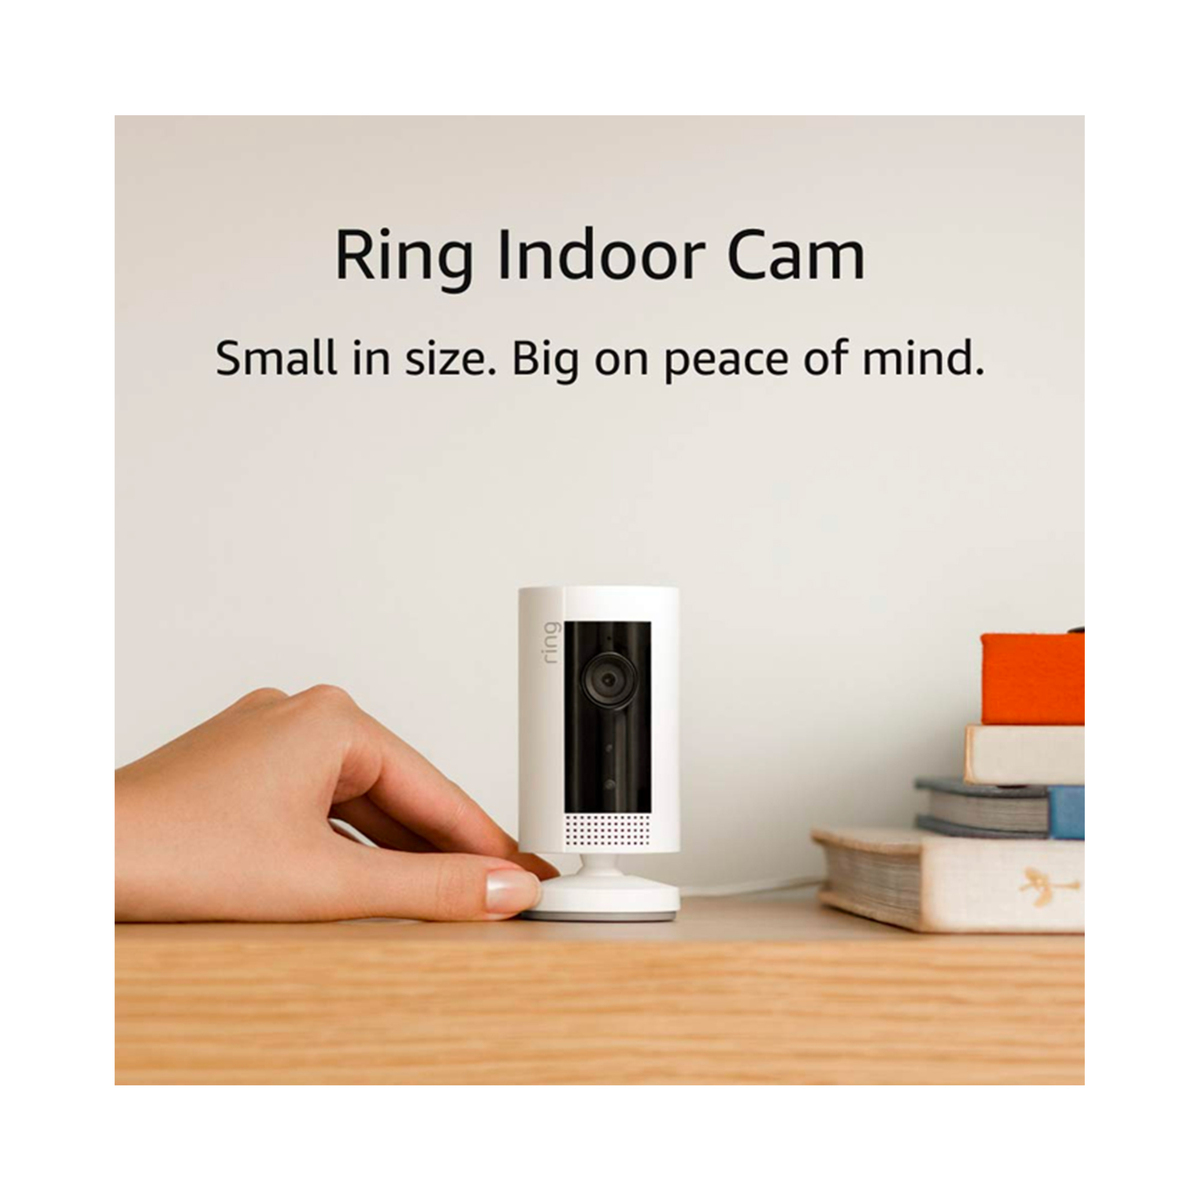 Ring Stick Up Camera Wired INDOOR CAM